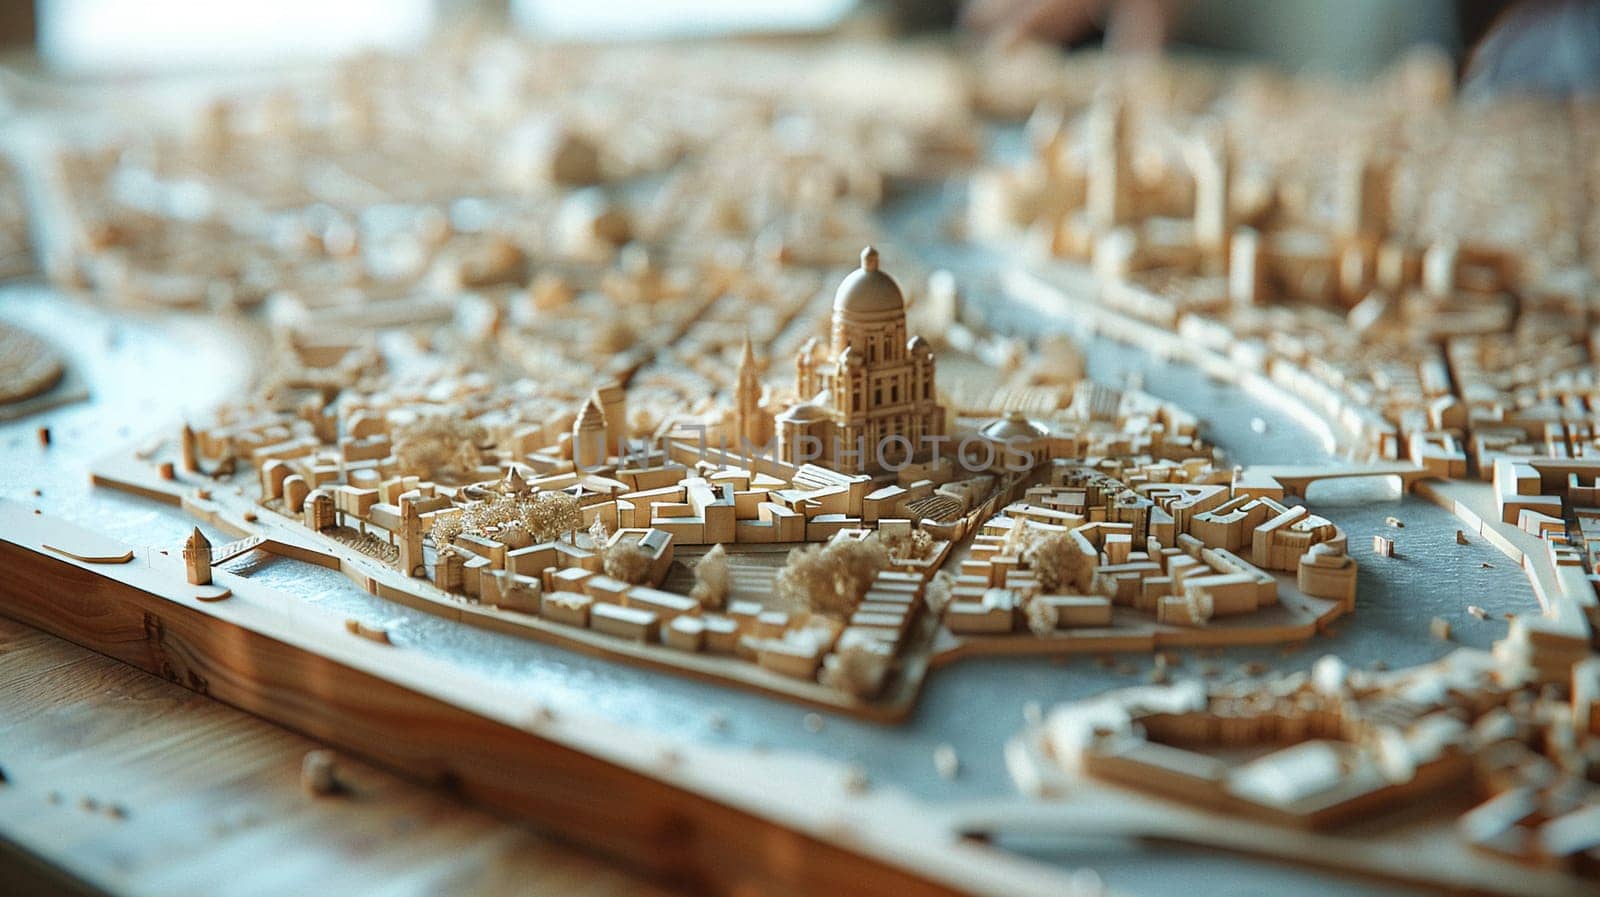 Urban Planner Designing Cityscapes with Sustainable Models, The planner's tools blur into digital city models, focusing on urban sustainability.